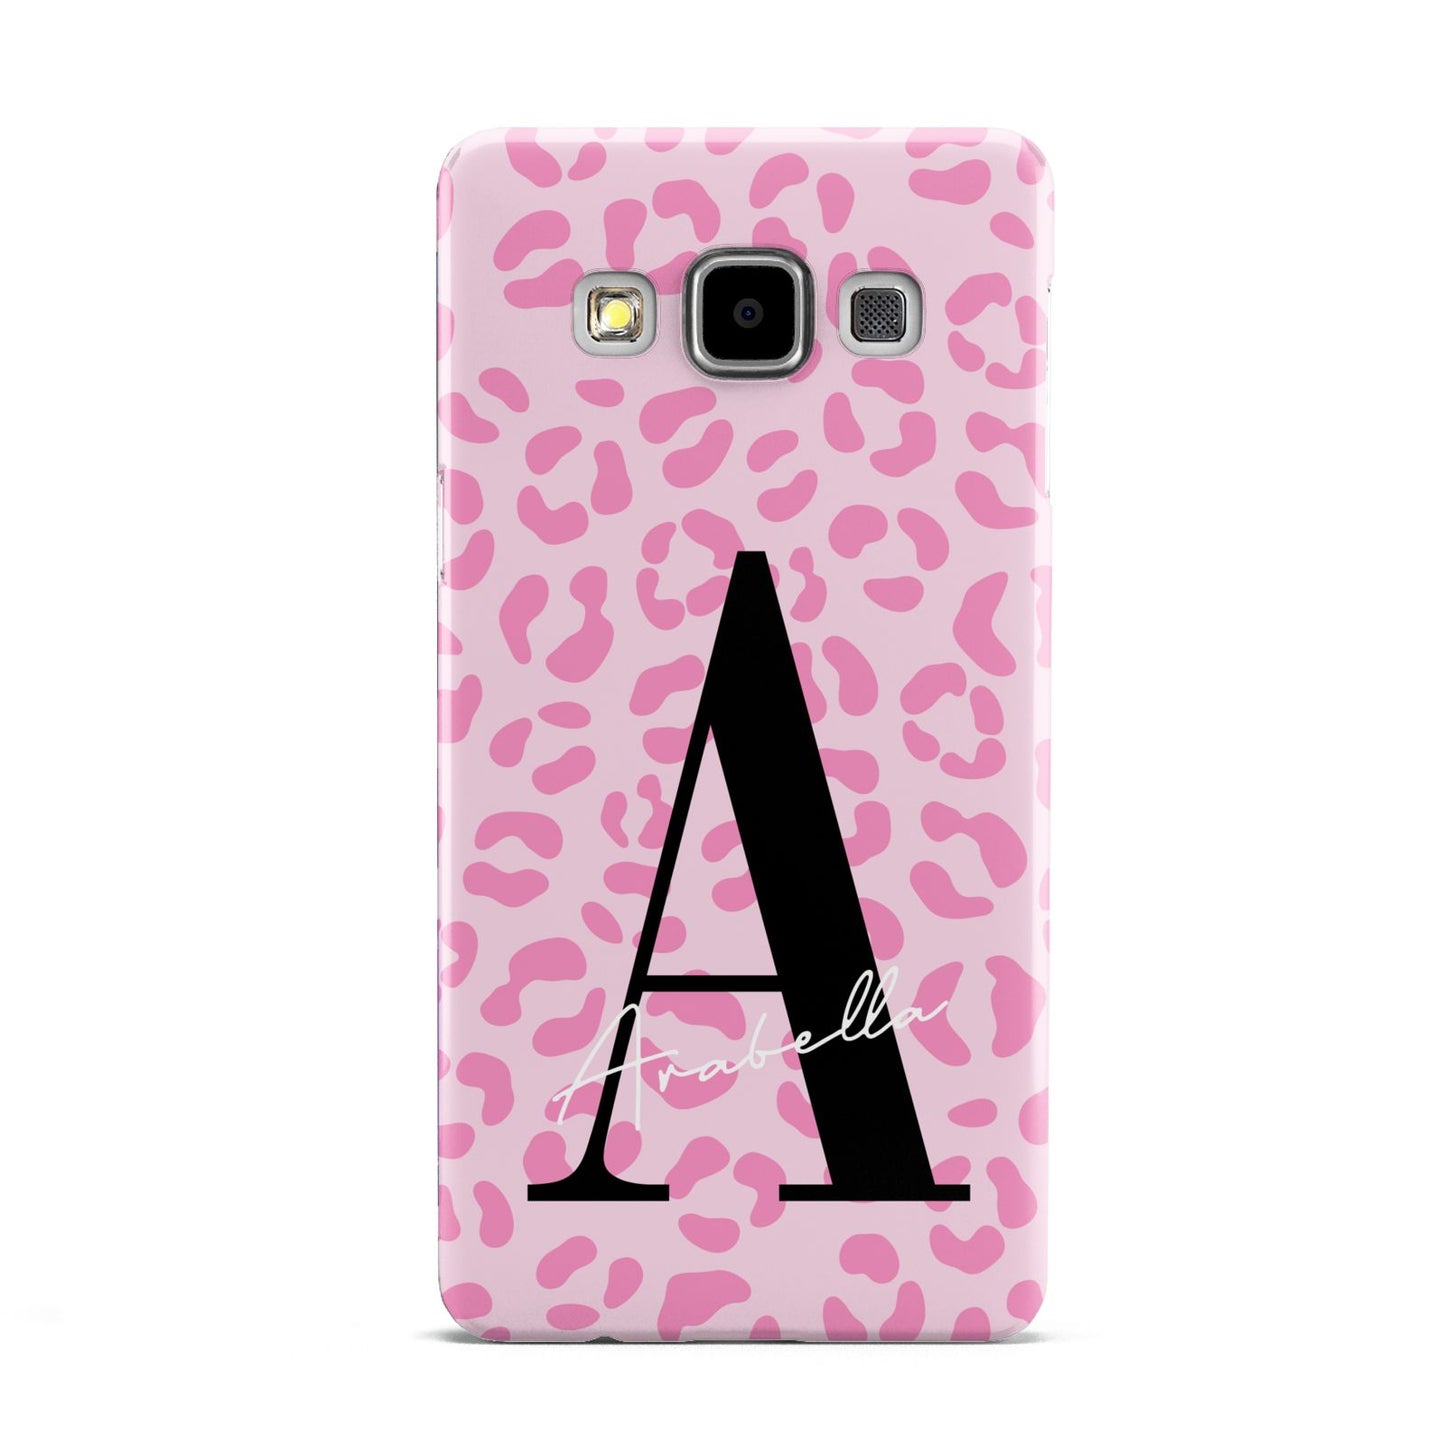 Personalised Pink Leopard Print Samsung Galaxy A5 Case